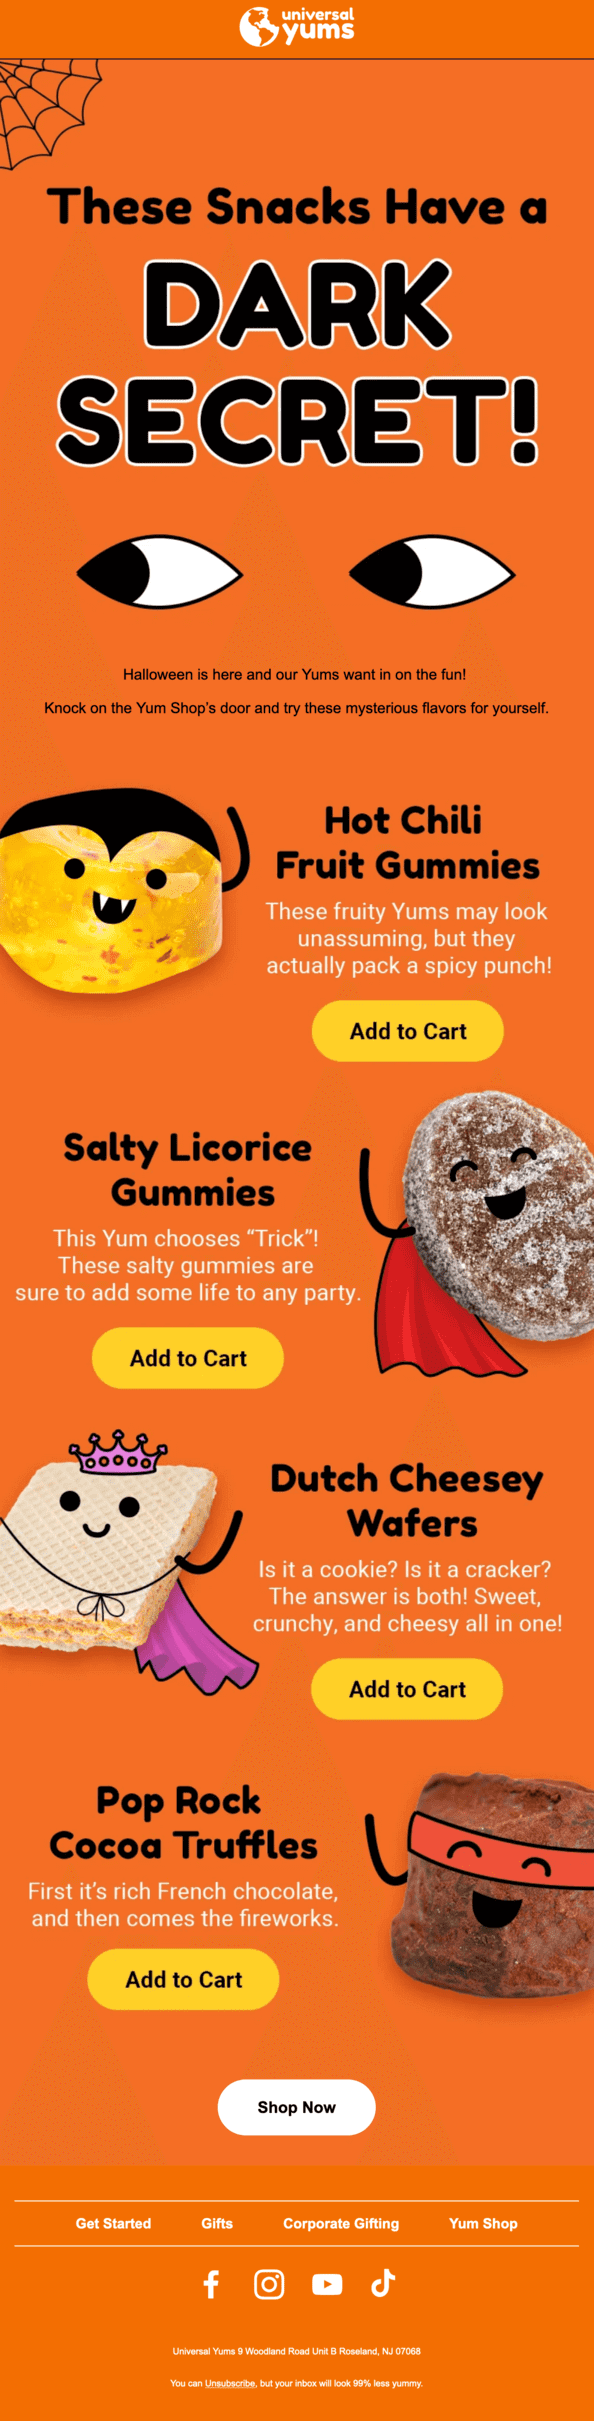 A Halloween email promoting different snacks